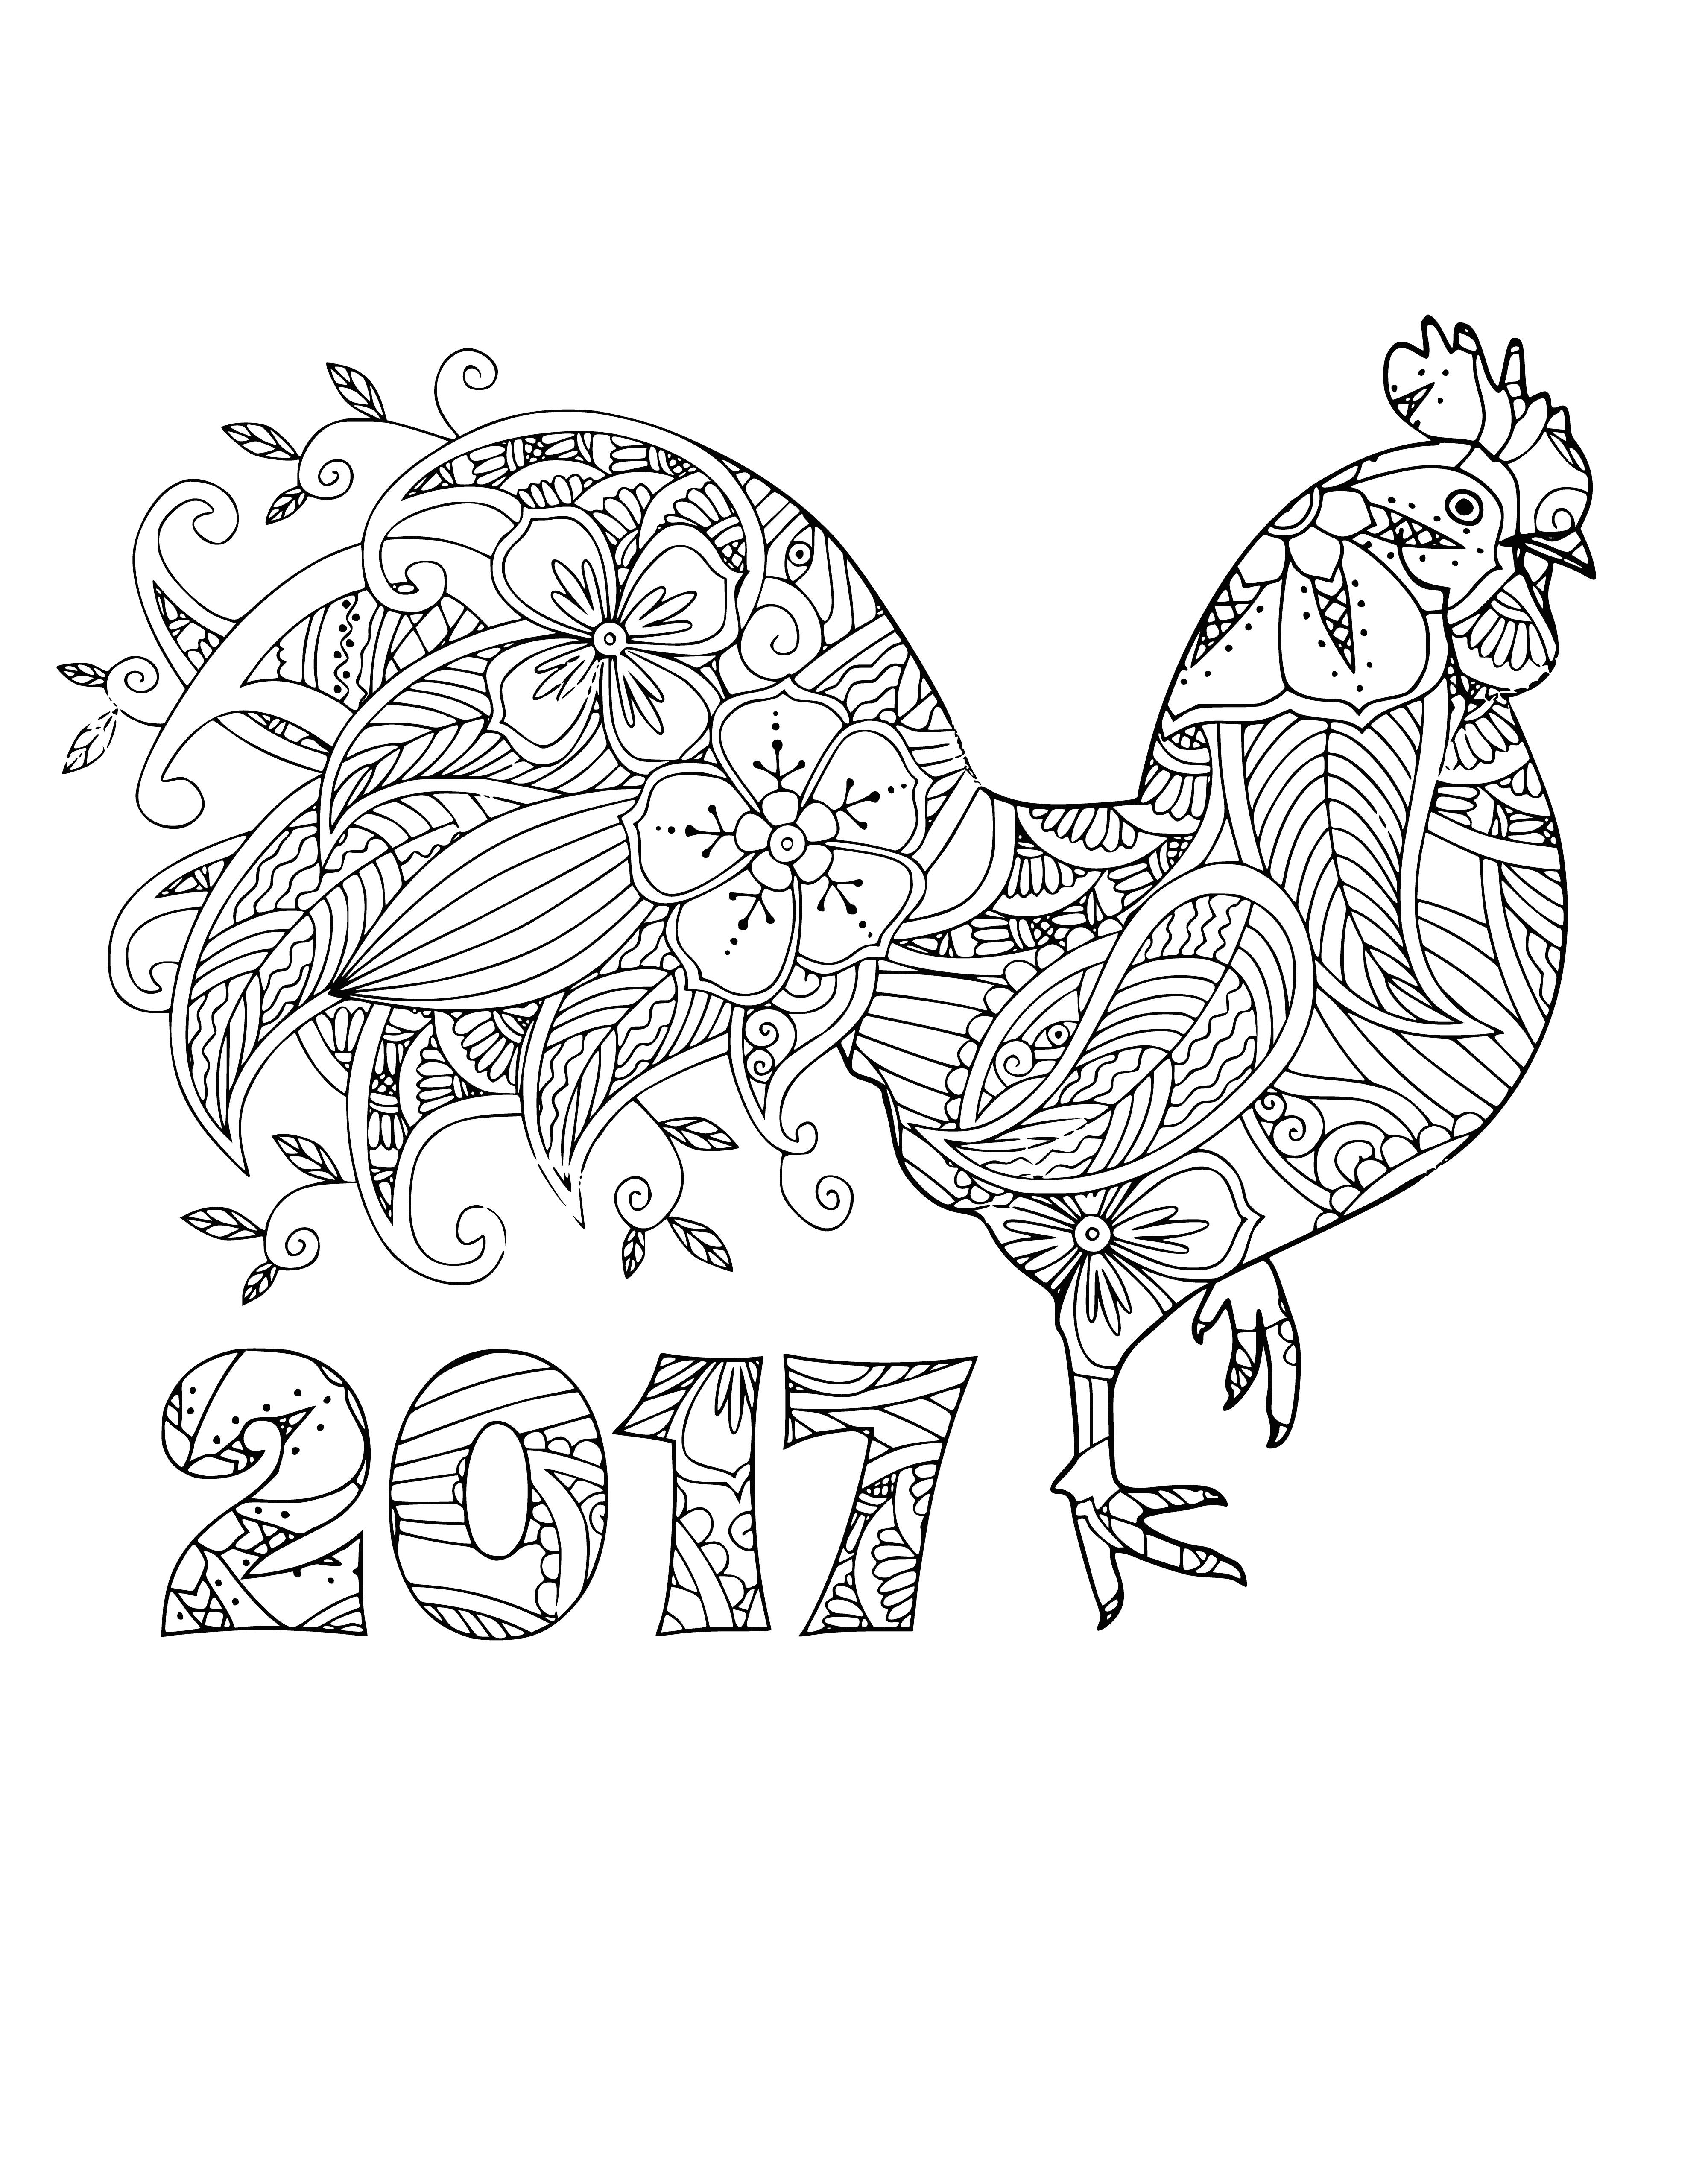 Rooster 2017 coloring page